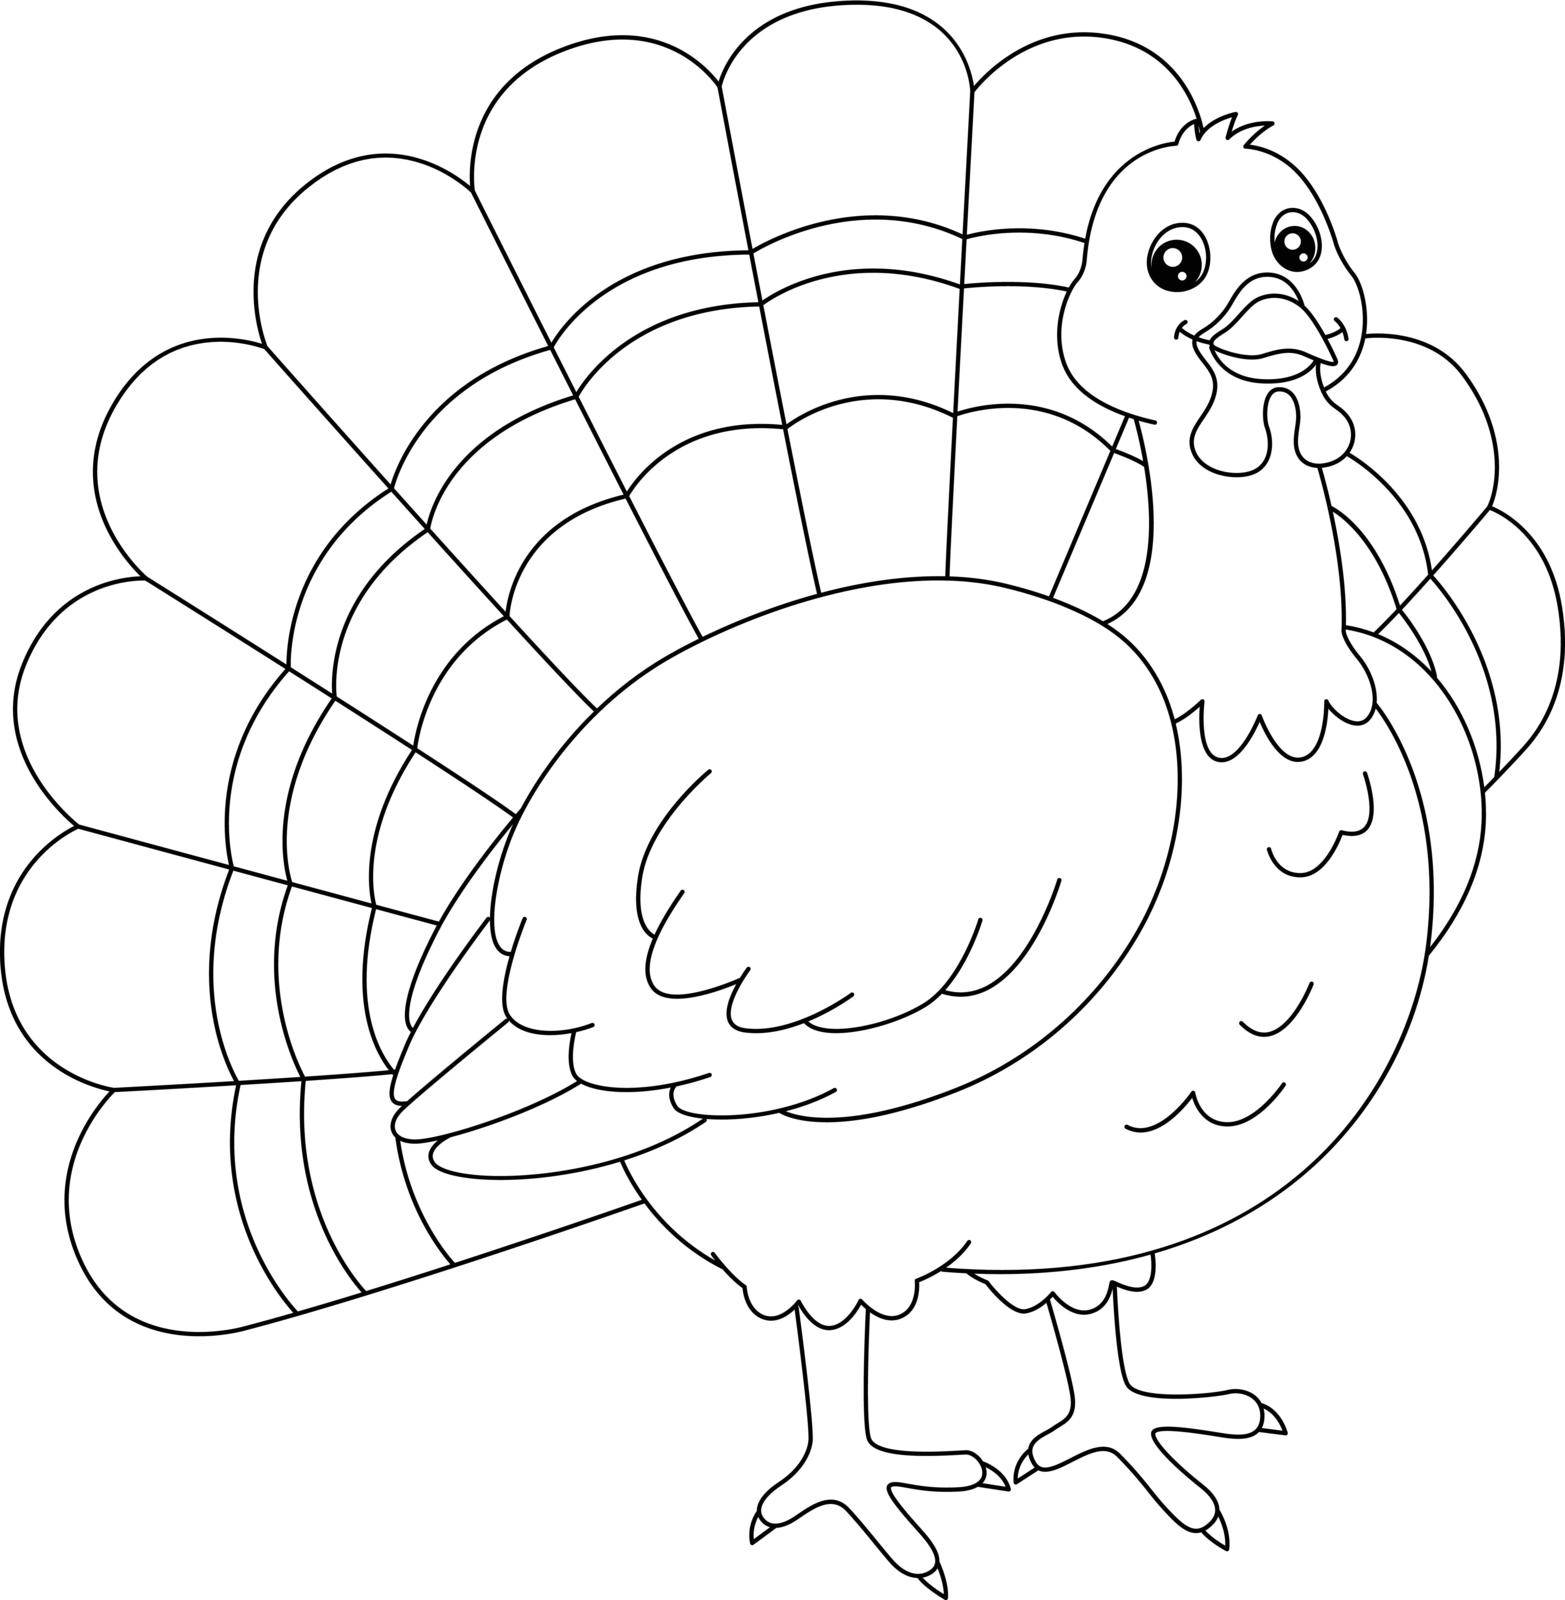 A cute and funny coloring page of a turkey. Provides hours of coloring fun for children. To color, this page is very easy. Suitable for little kids and toddlers.